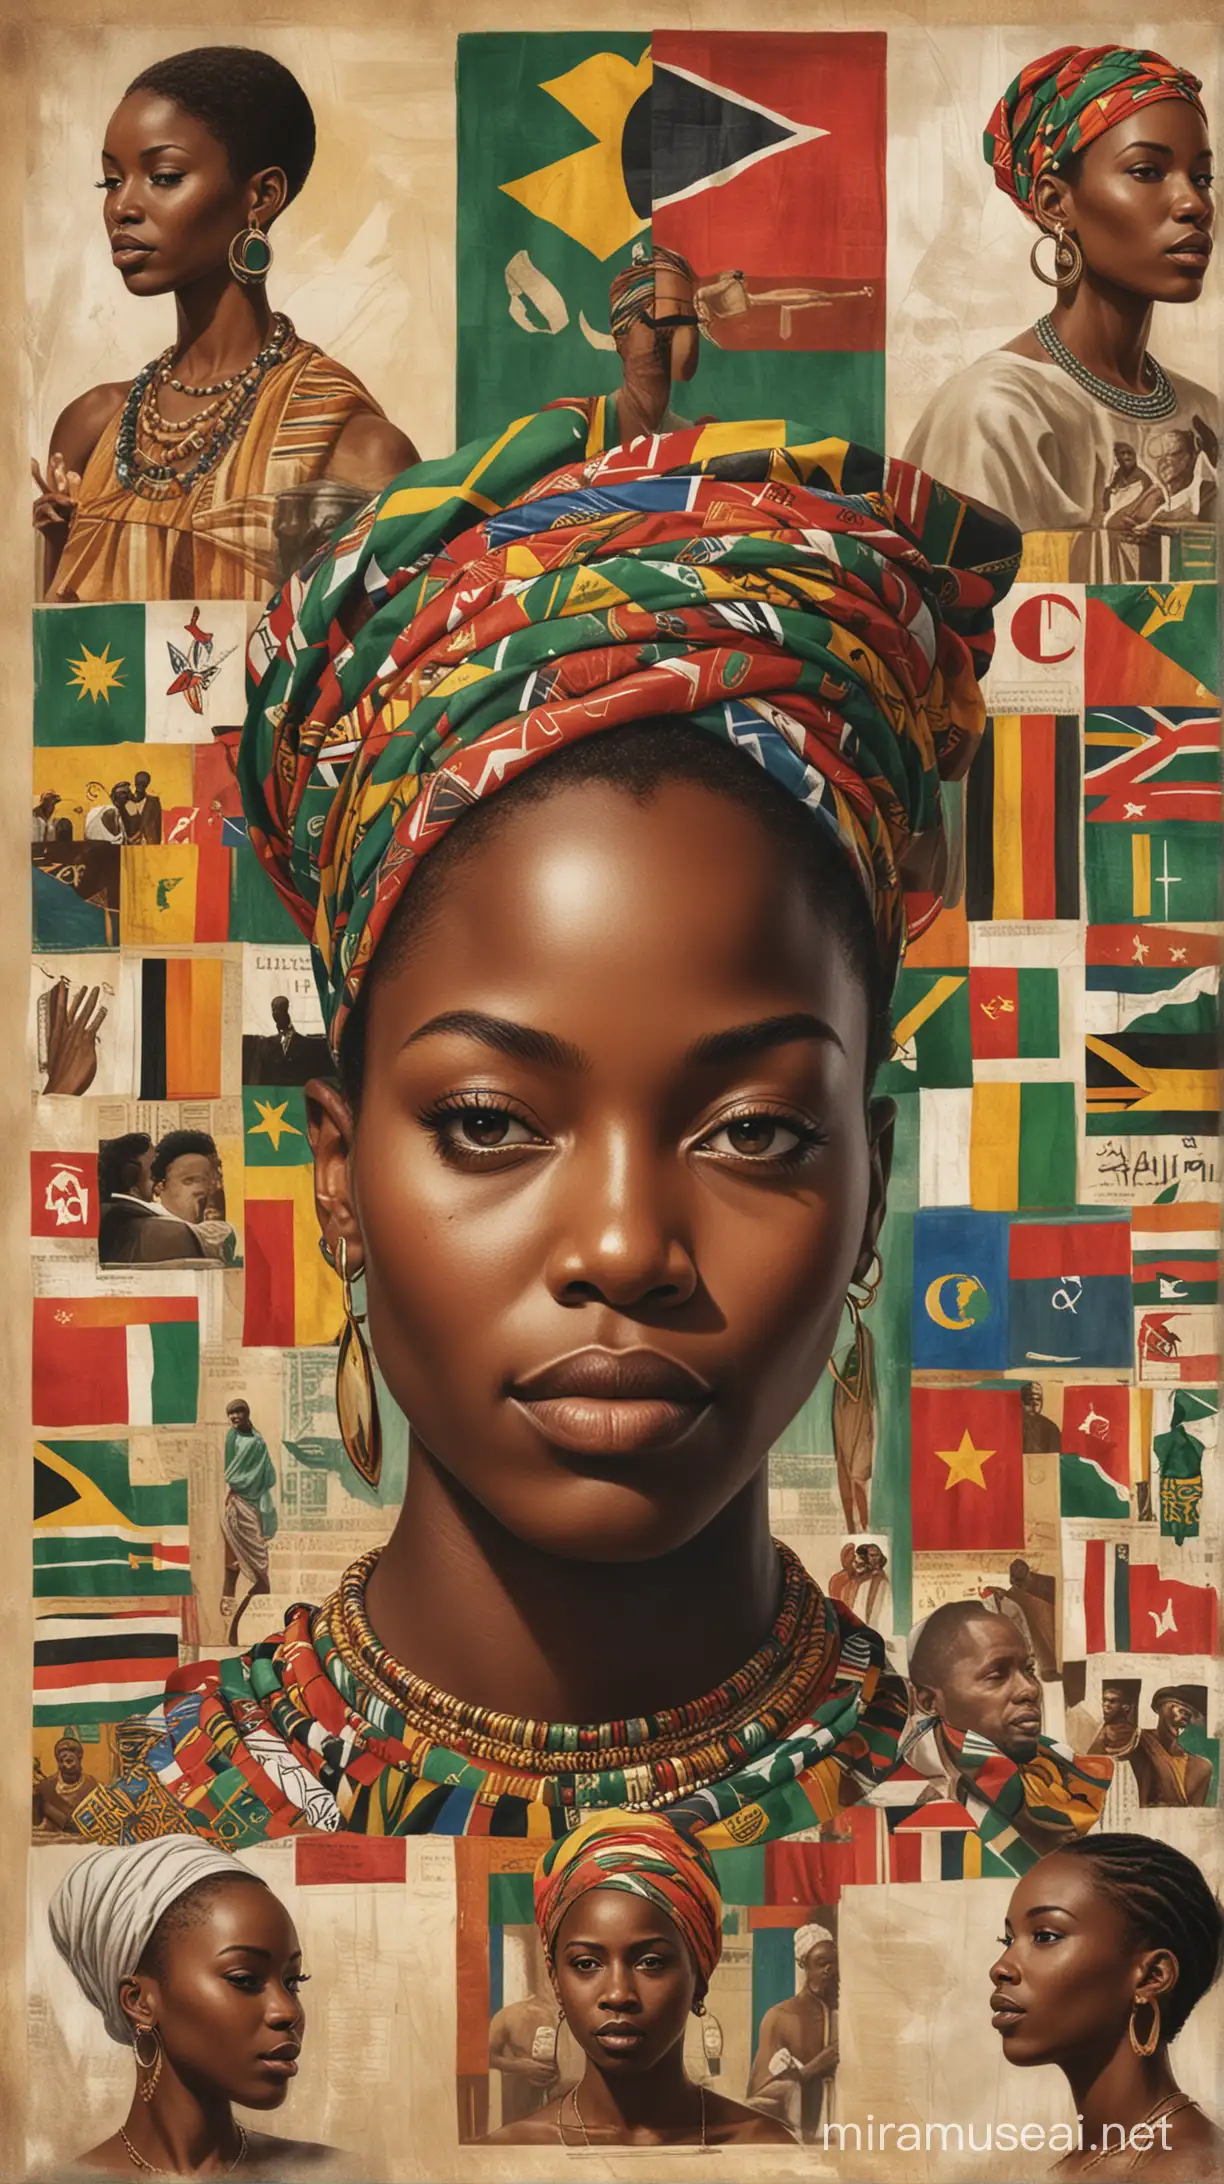 Create an image symbolizing the spirit of unity and pride in African heritage, featuring a collage of African flags and symbols of solidarity, encouraging Africans worldwide to embrace their true identity.